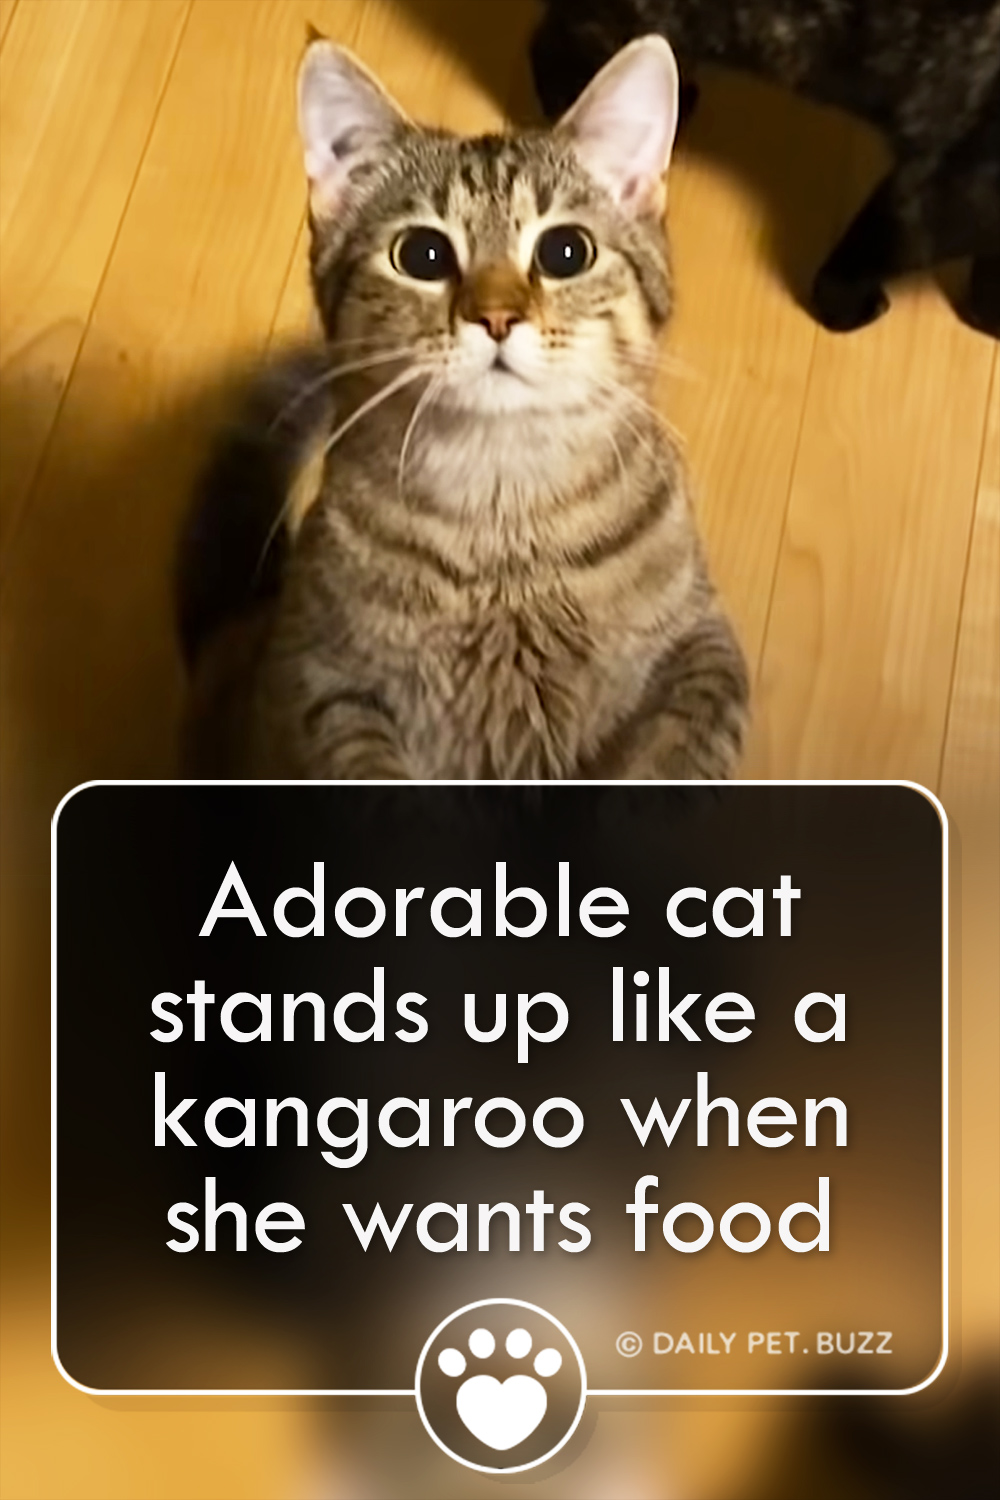 Adorable cat stands up like a kangaroo when she wants food